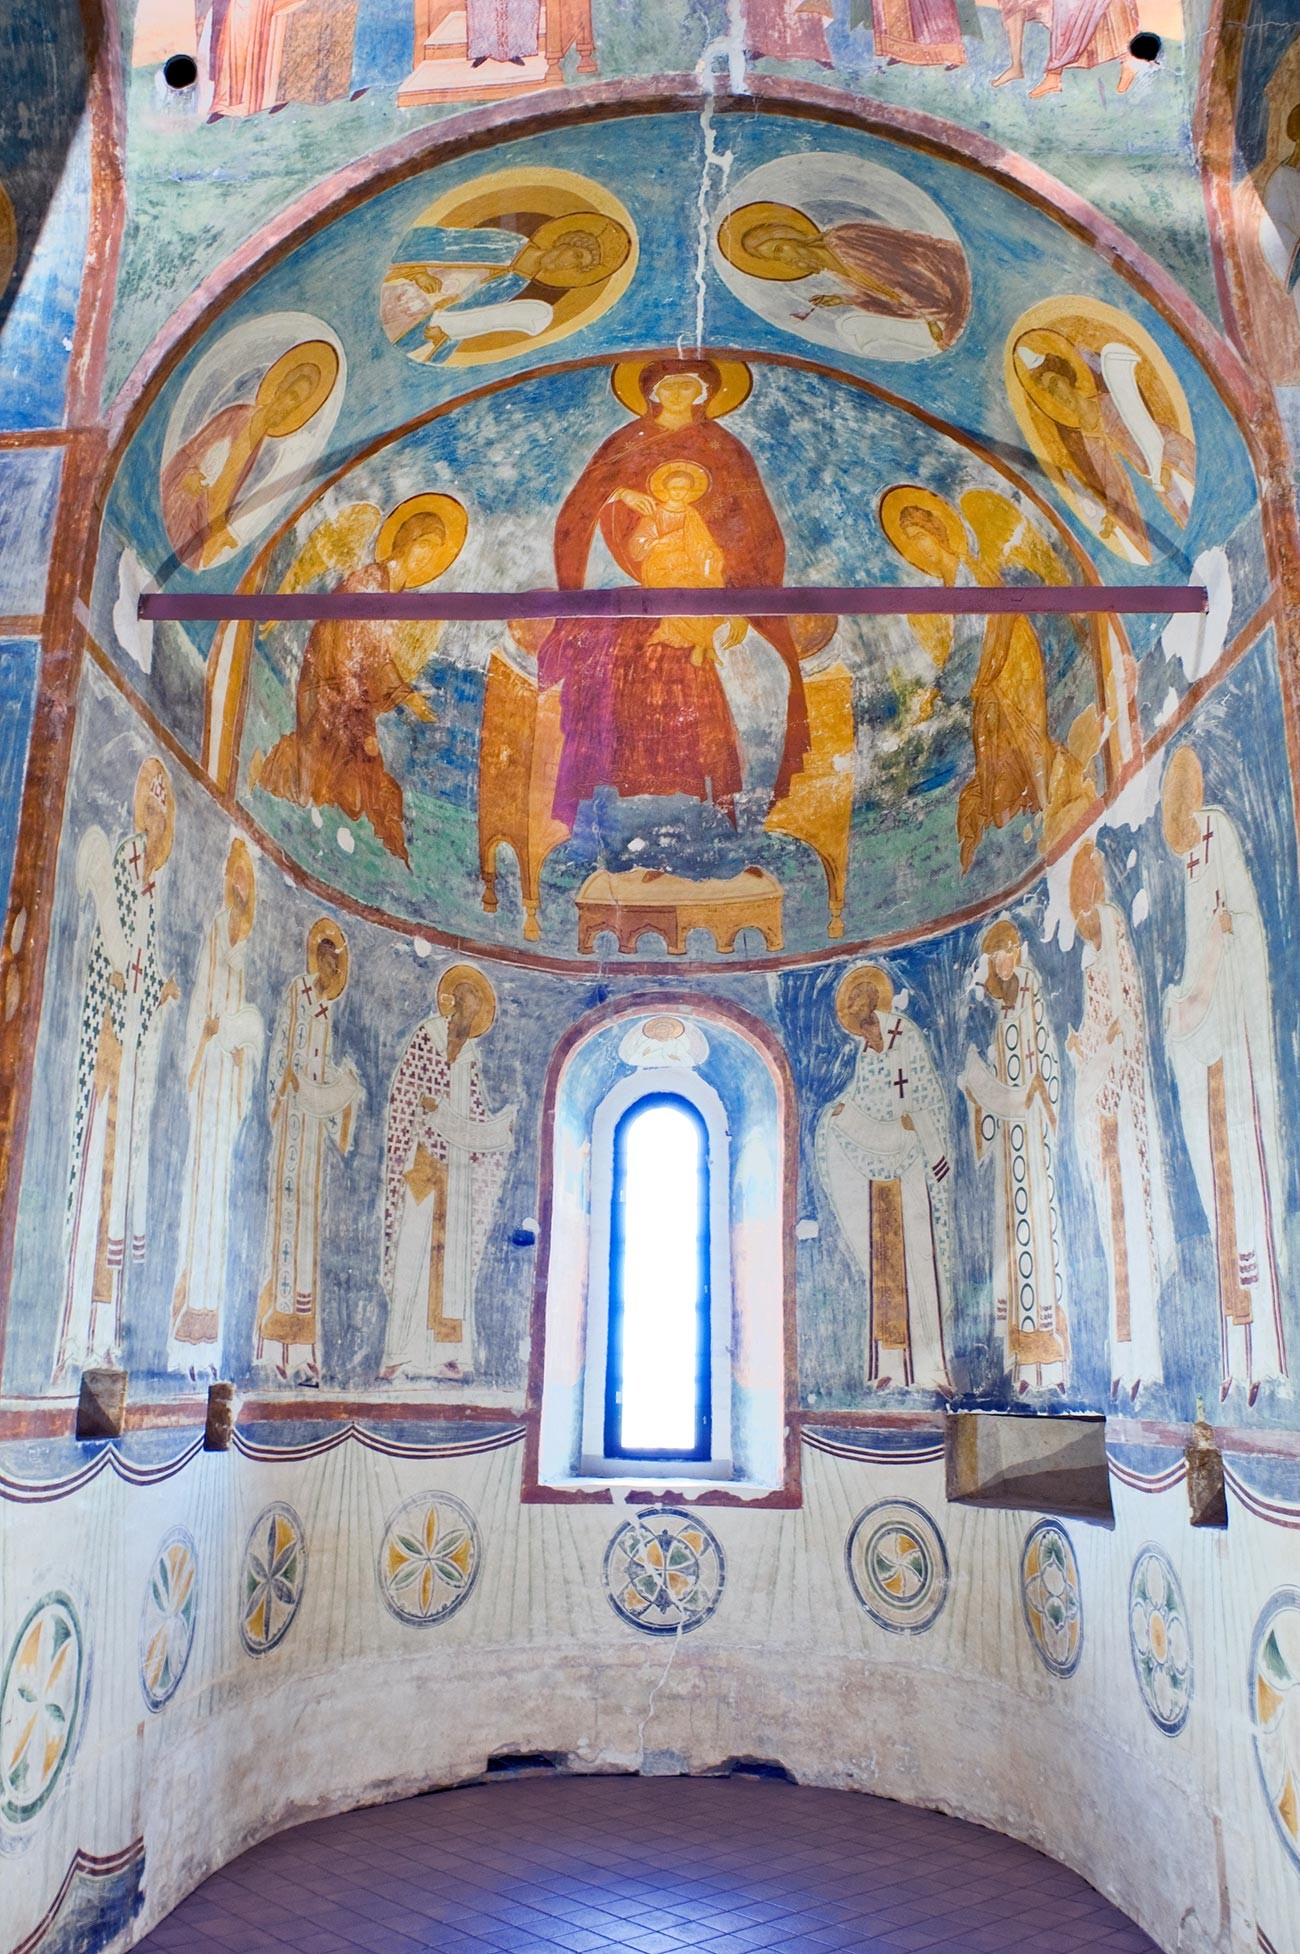 Cathedral of Nativity. Central apse (for main altar). Fresco of Mary enthroned with Archangels Gabriel & Michael. Lower row: Church Fathers at liturgy. Foreground: iron tie rod stabilizing the walls. June 1, 2014 